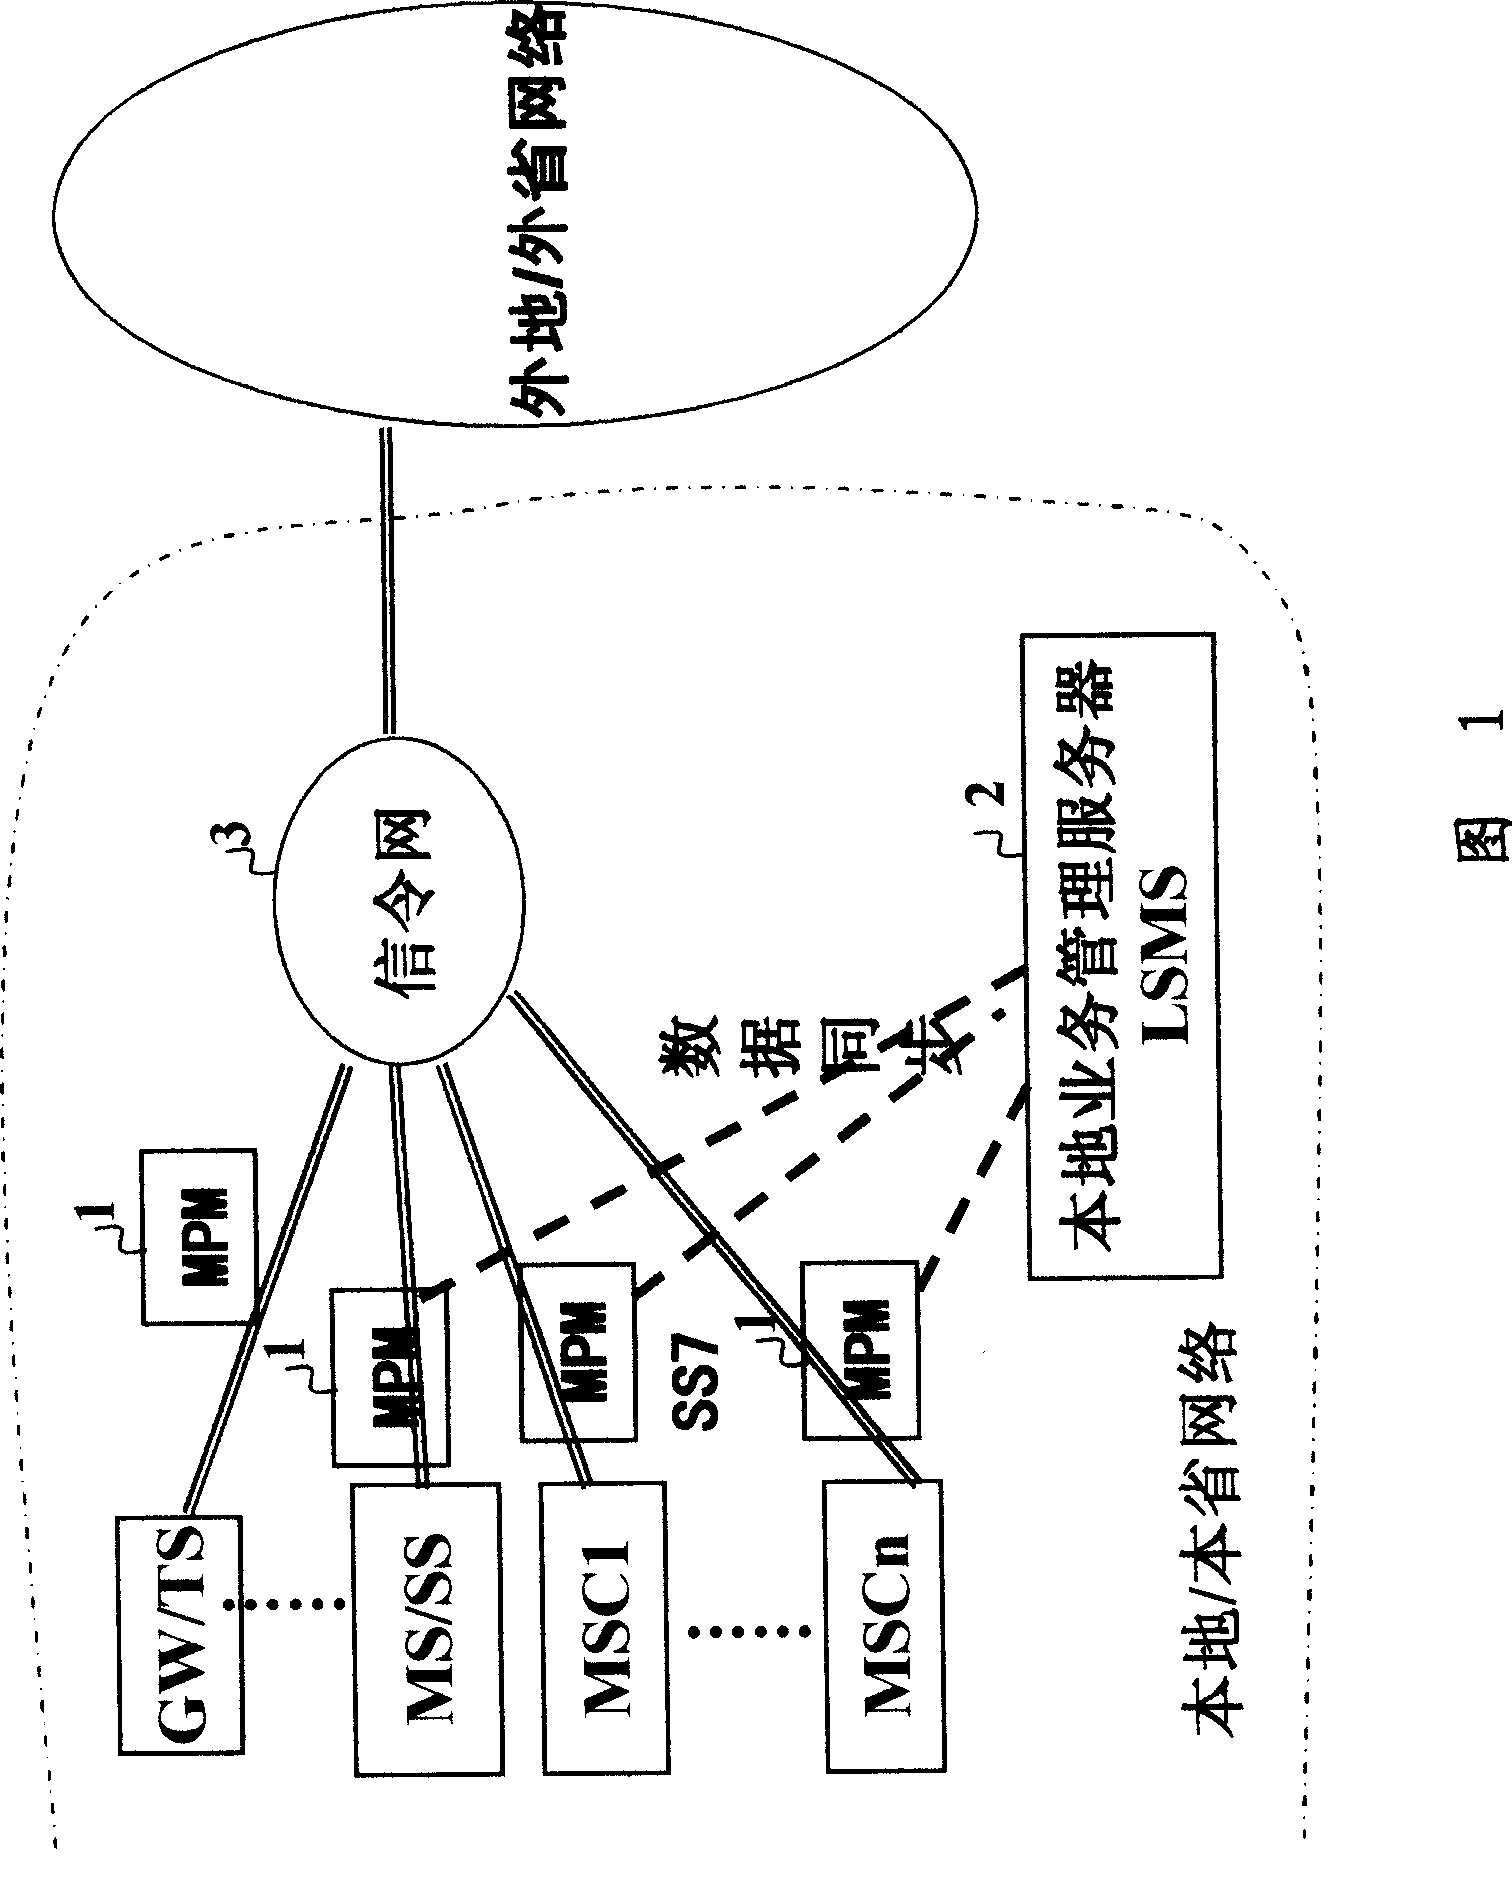 System and method for implementing call authentication gateway